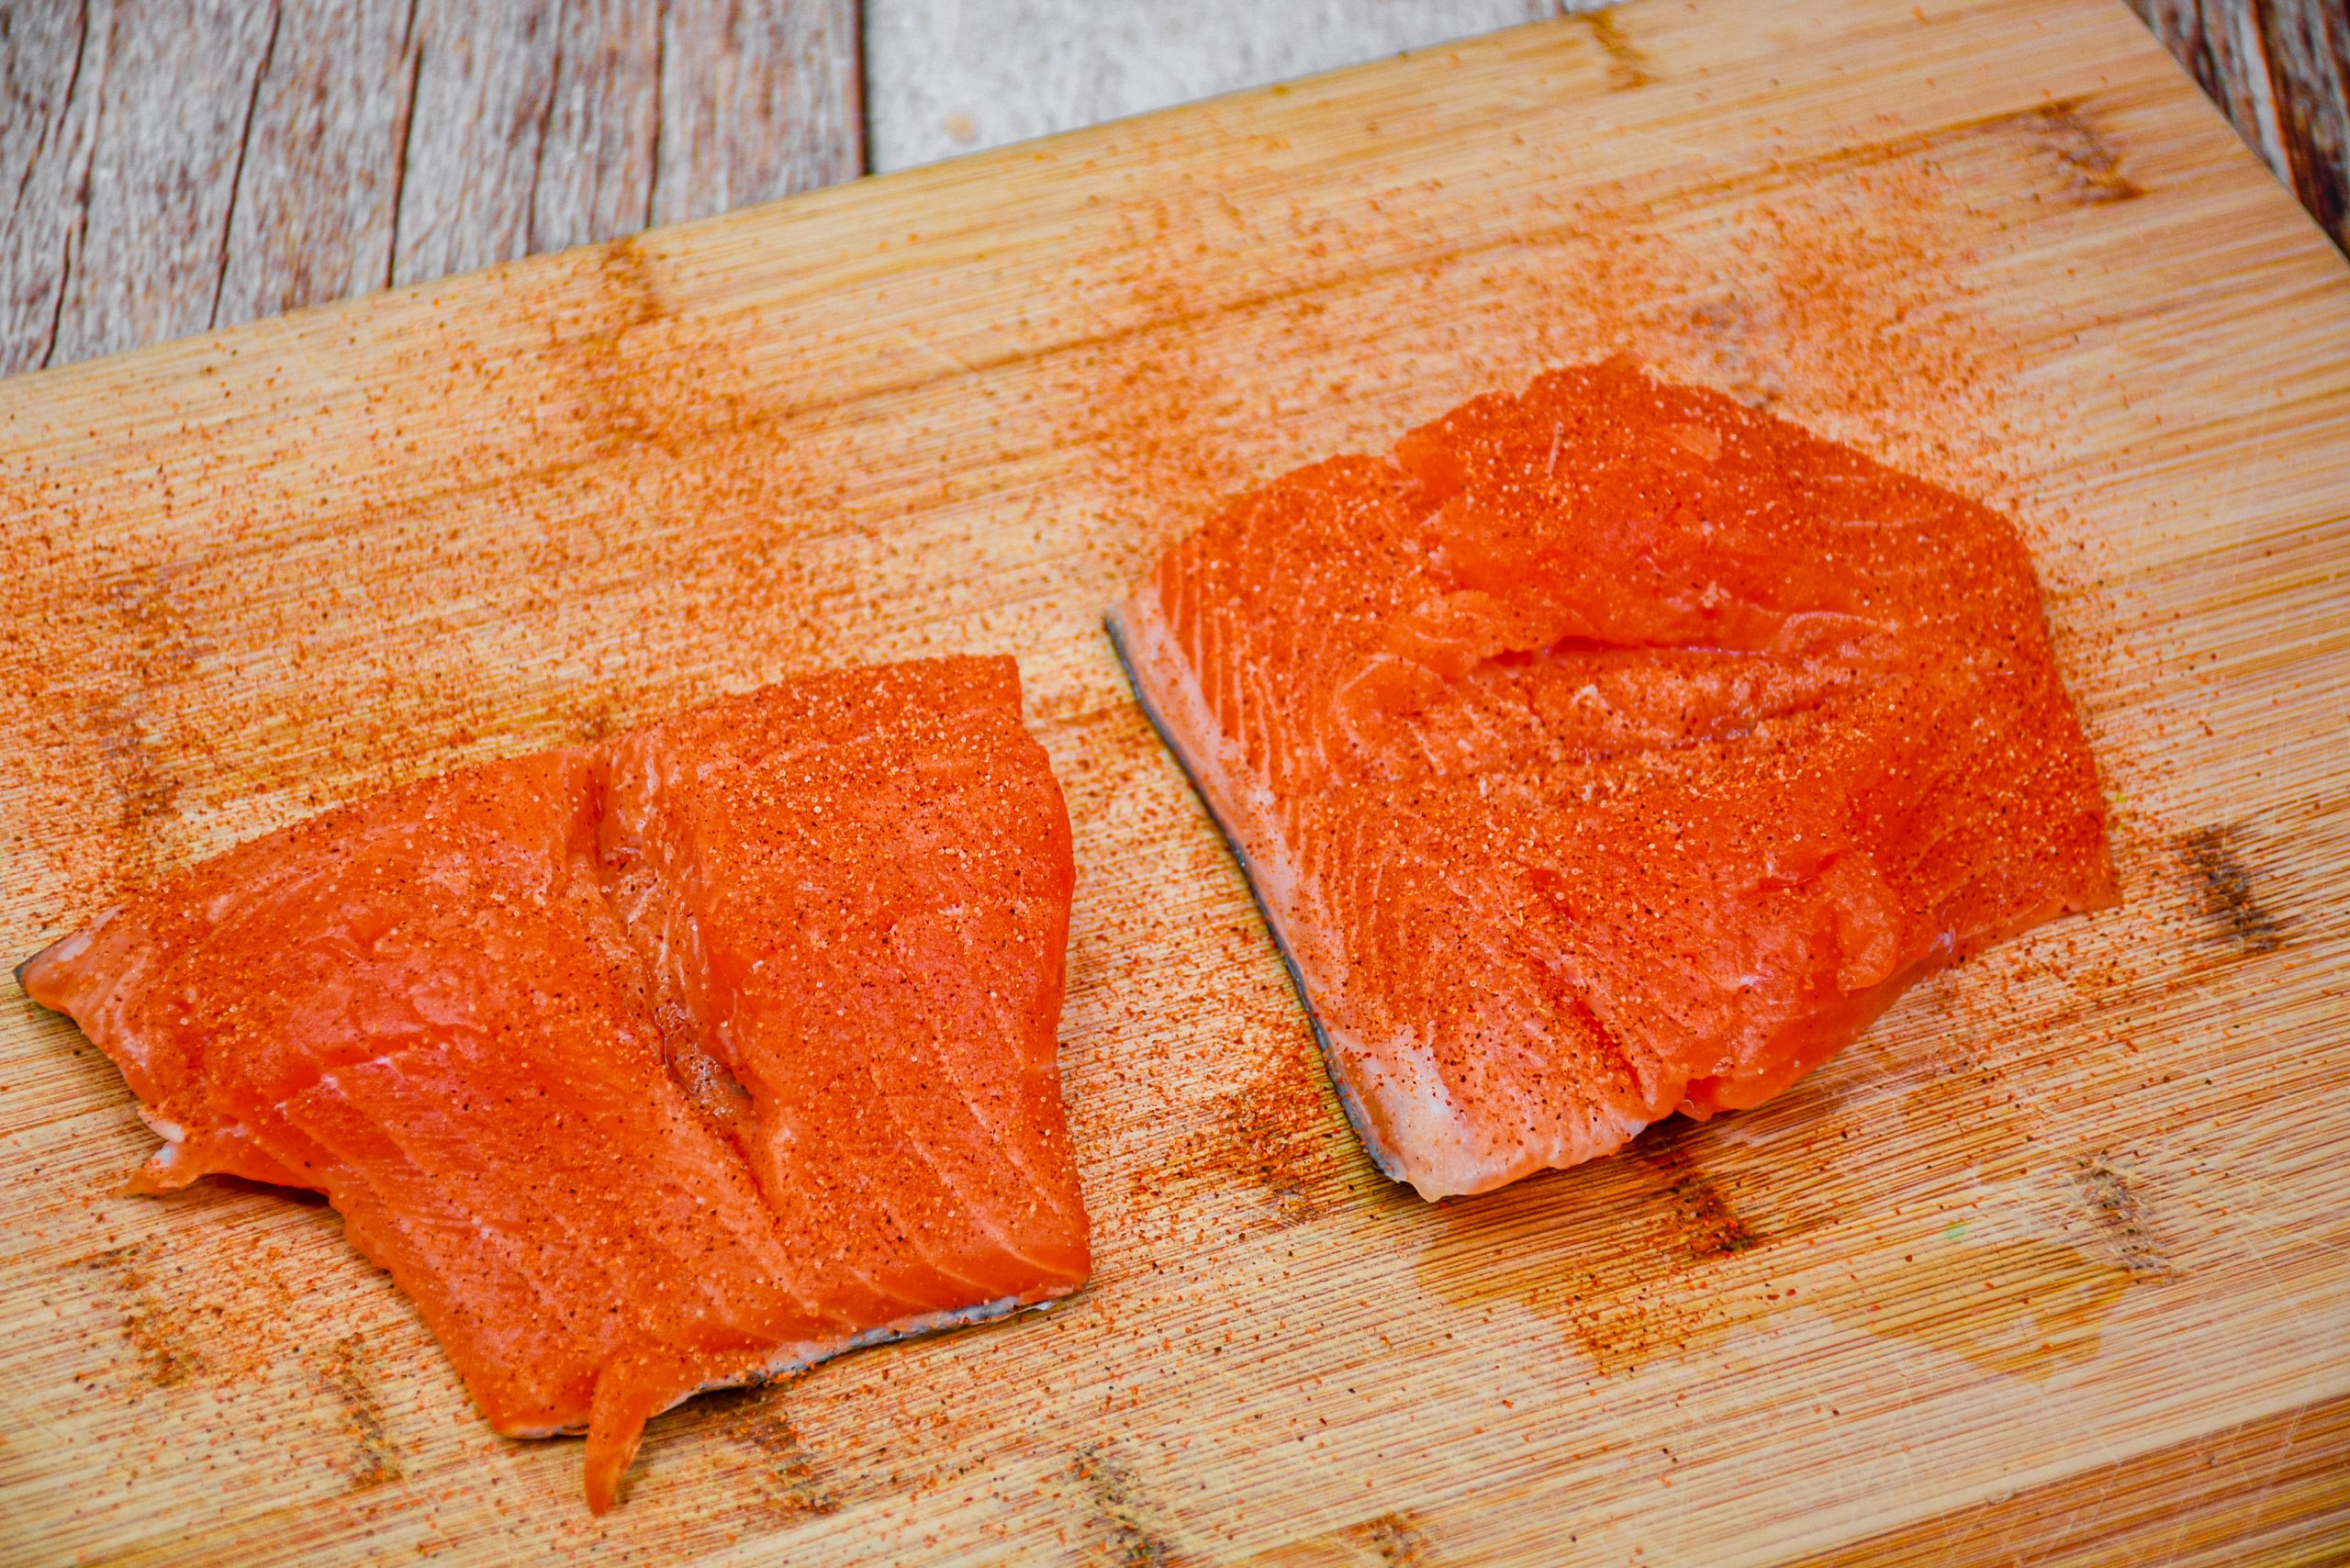 Cut a slit through the middle of each salmon fillet and season the whole salmon with cajun seasoning